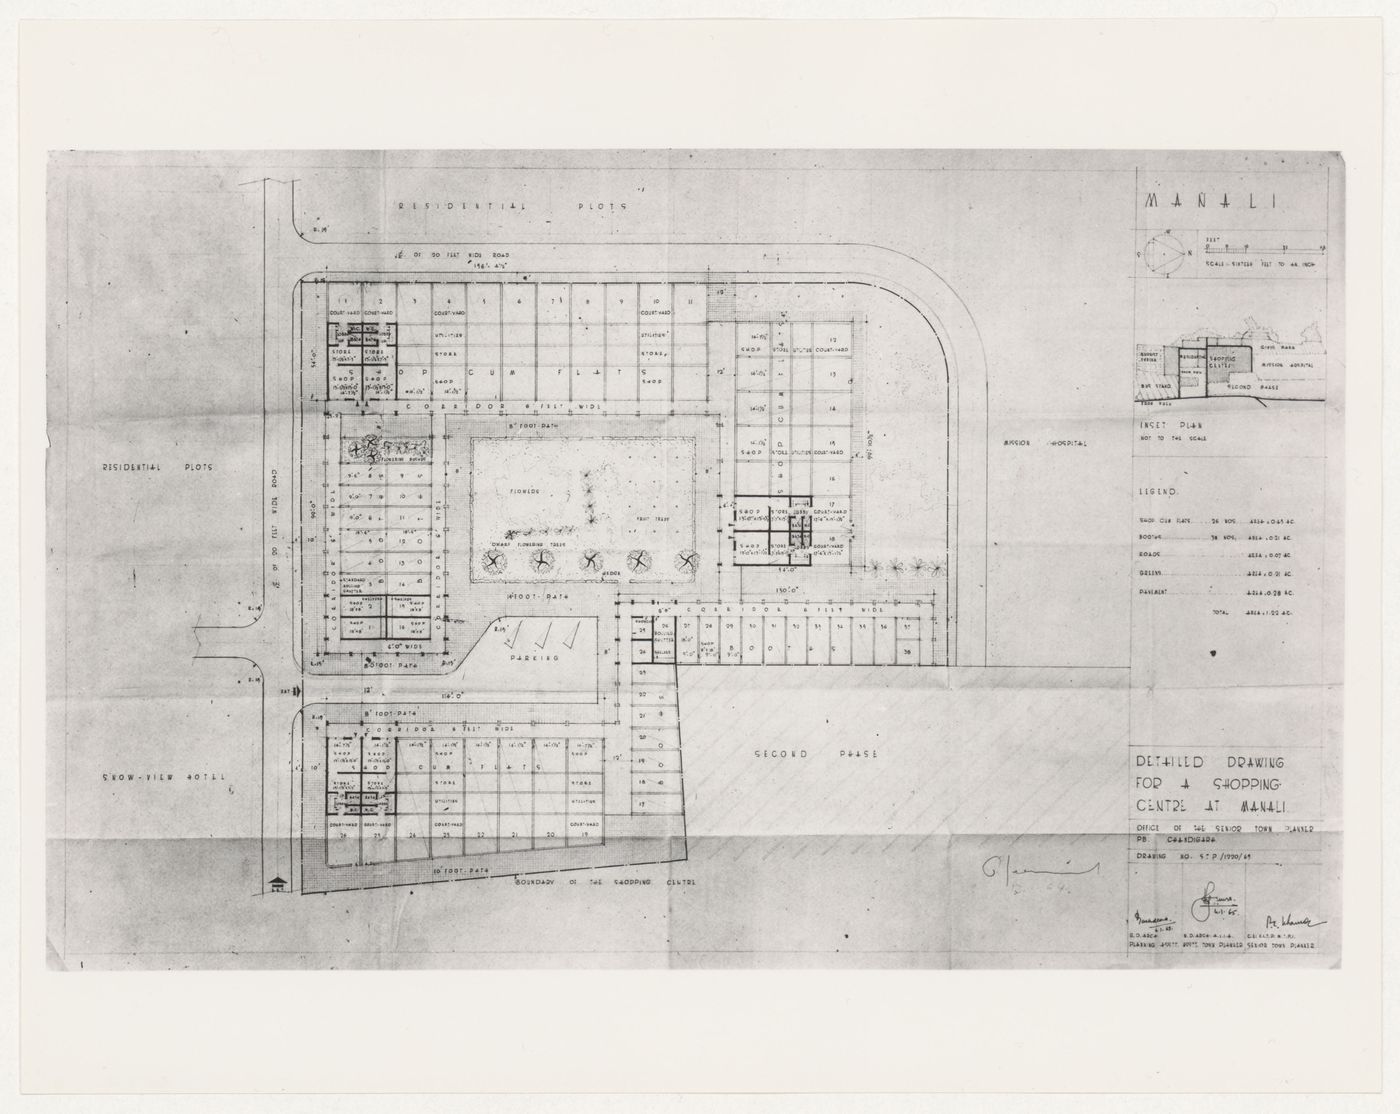 View of a plan with thumbnail site plan for a Shopping centre, Manāli, India